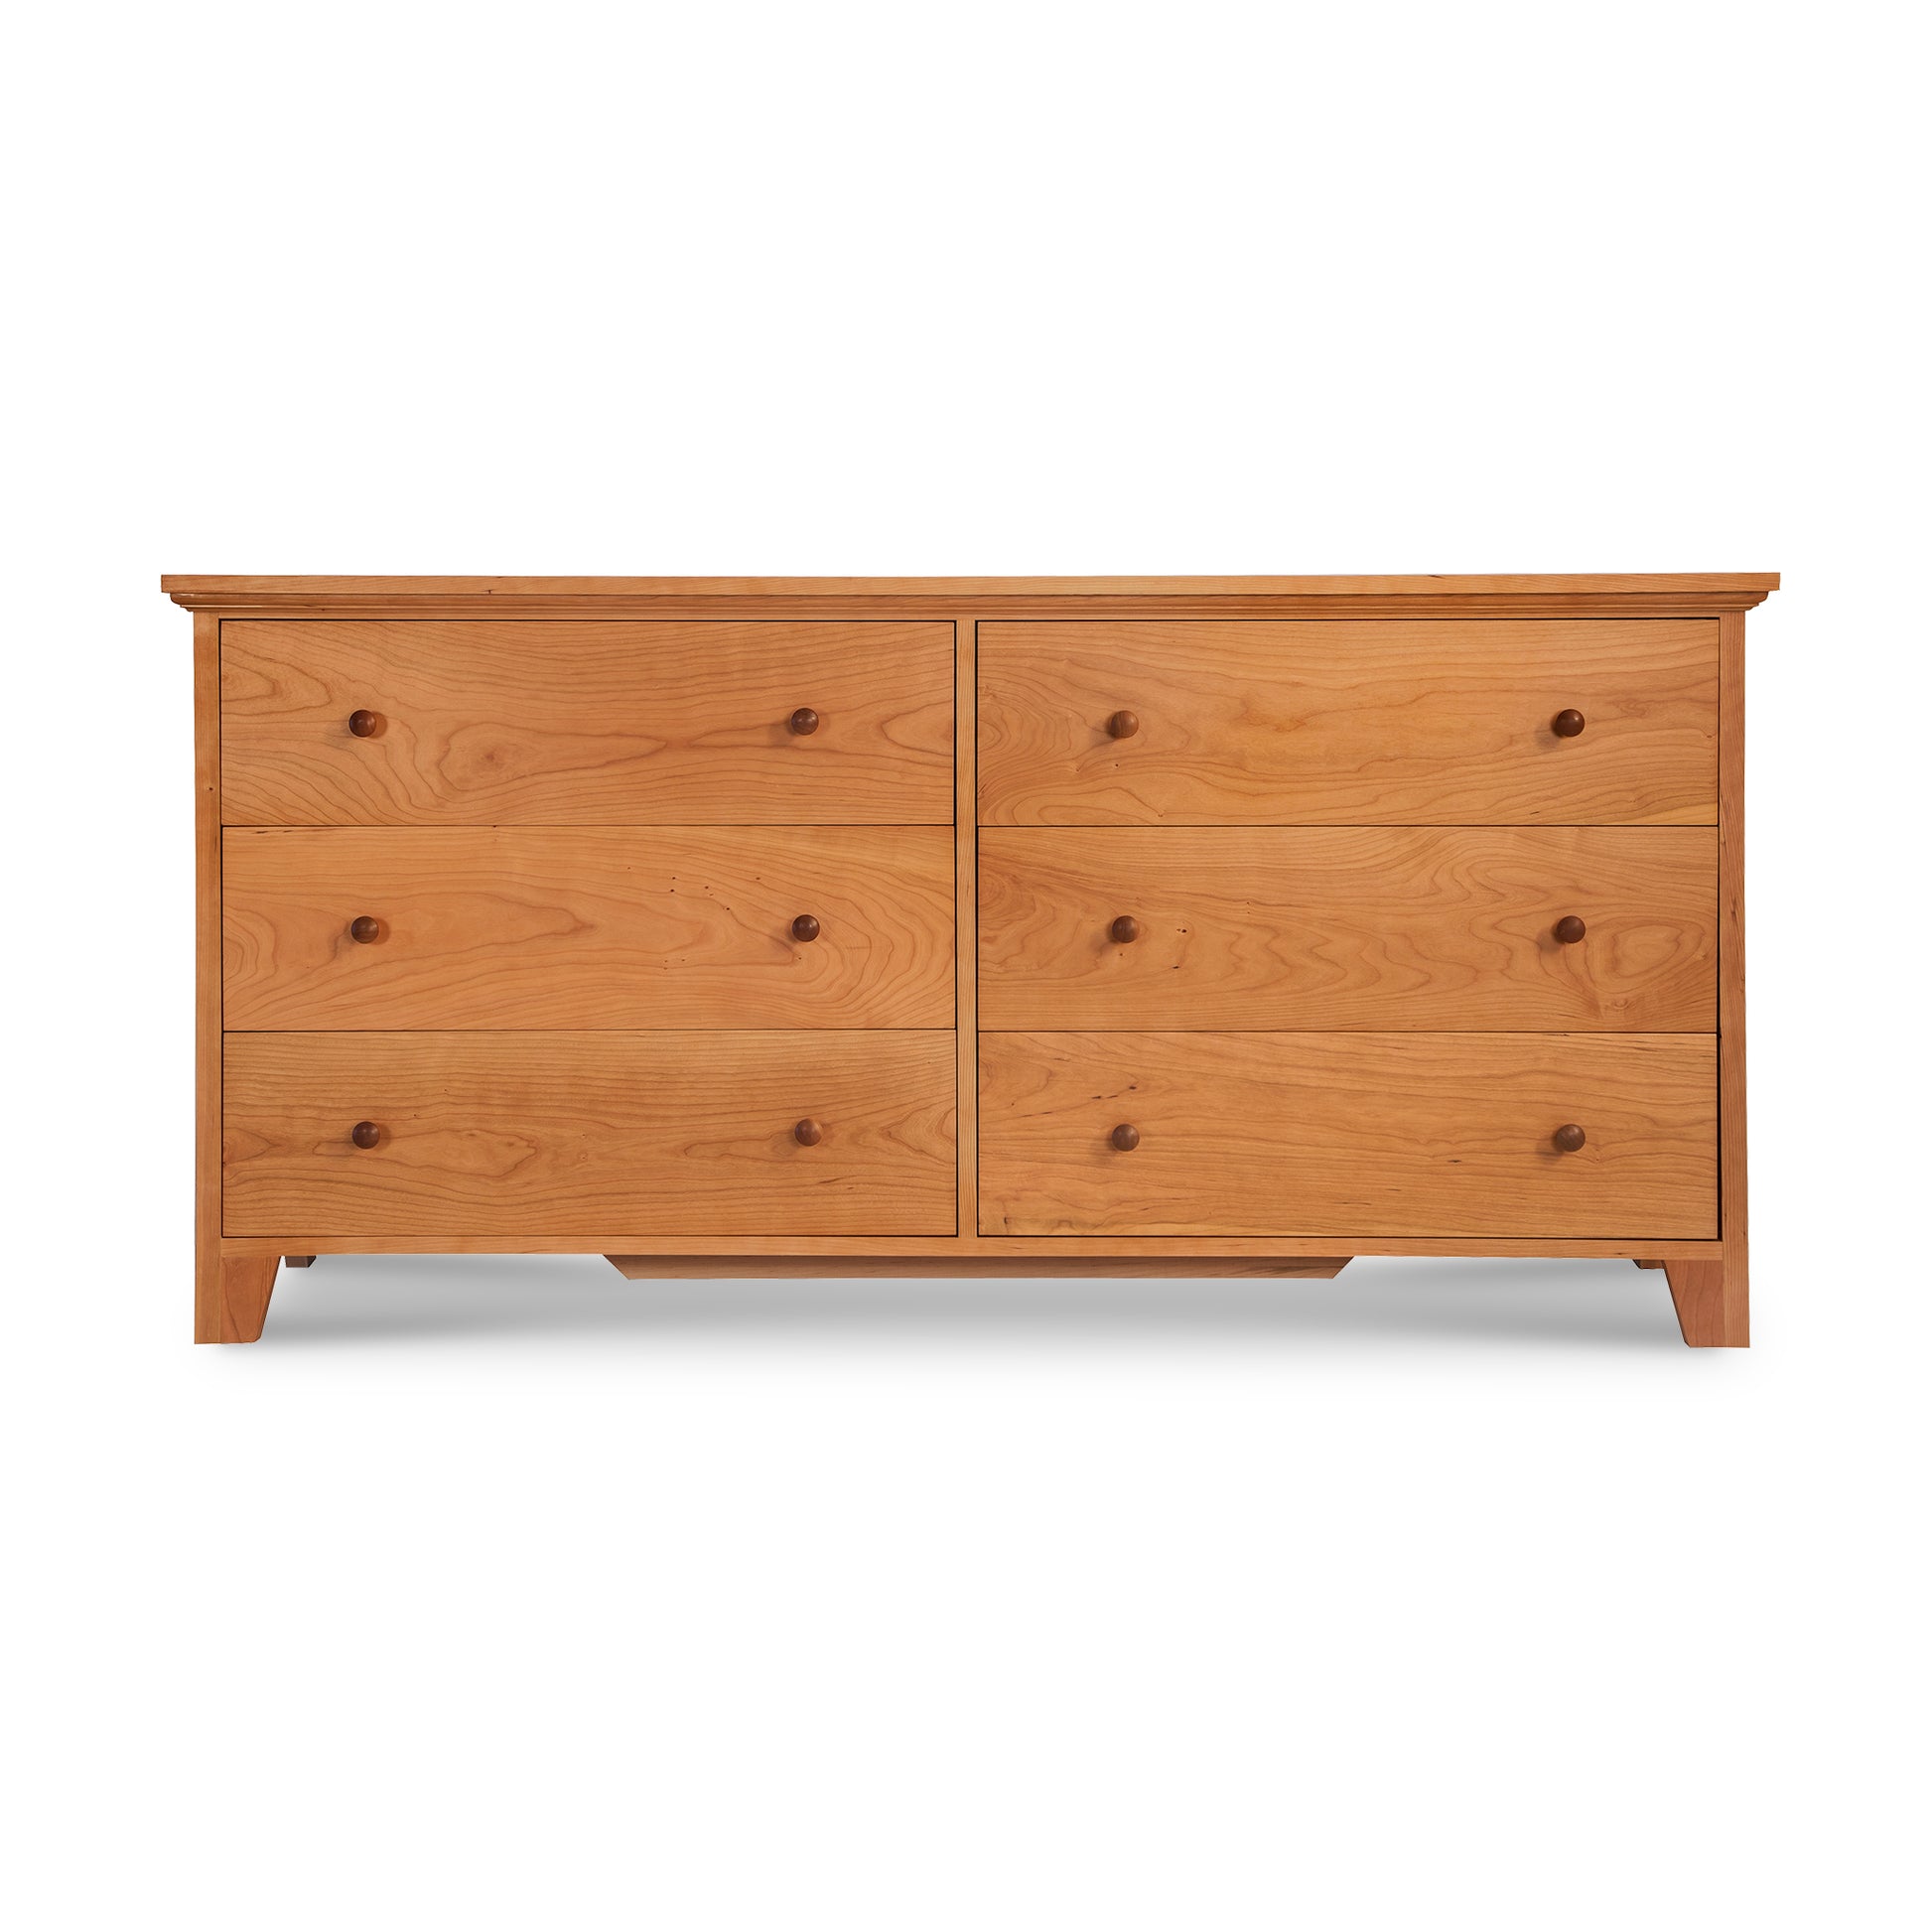 American Country 6-Drawer Dresser by Lyndon Furniture, handmade in Vermont, with a simple design featuring three rows of two drawers each, all set on a low base and isolated against a white background.